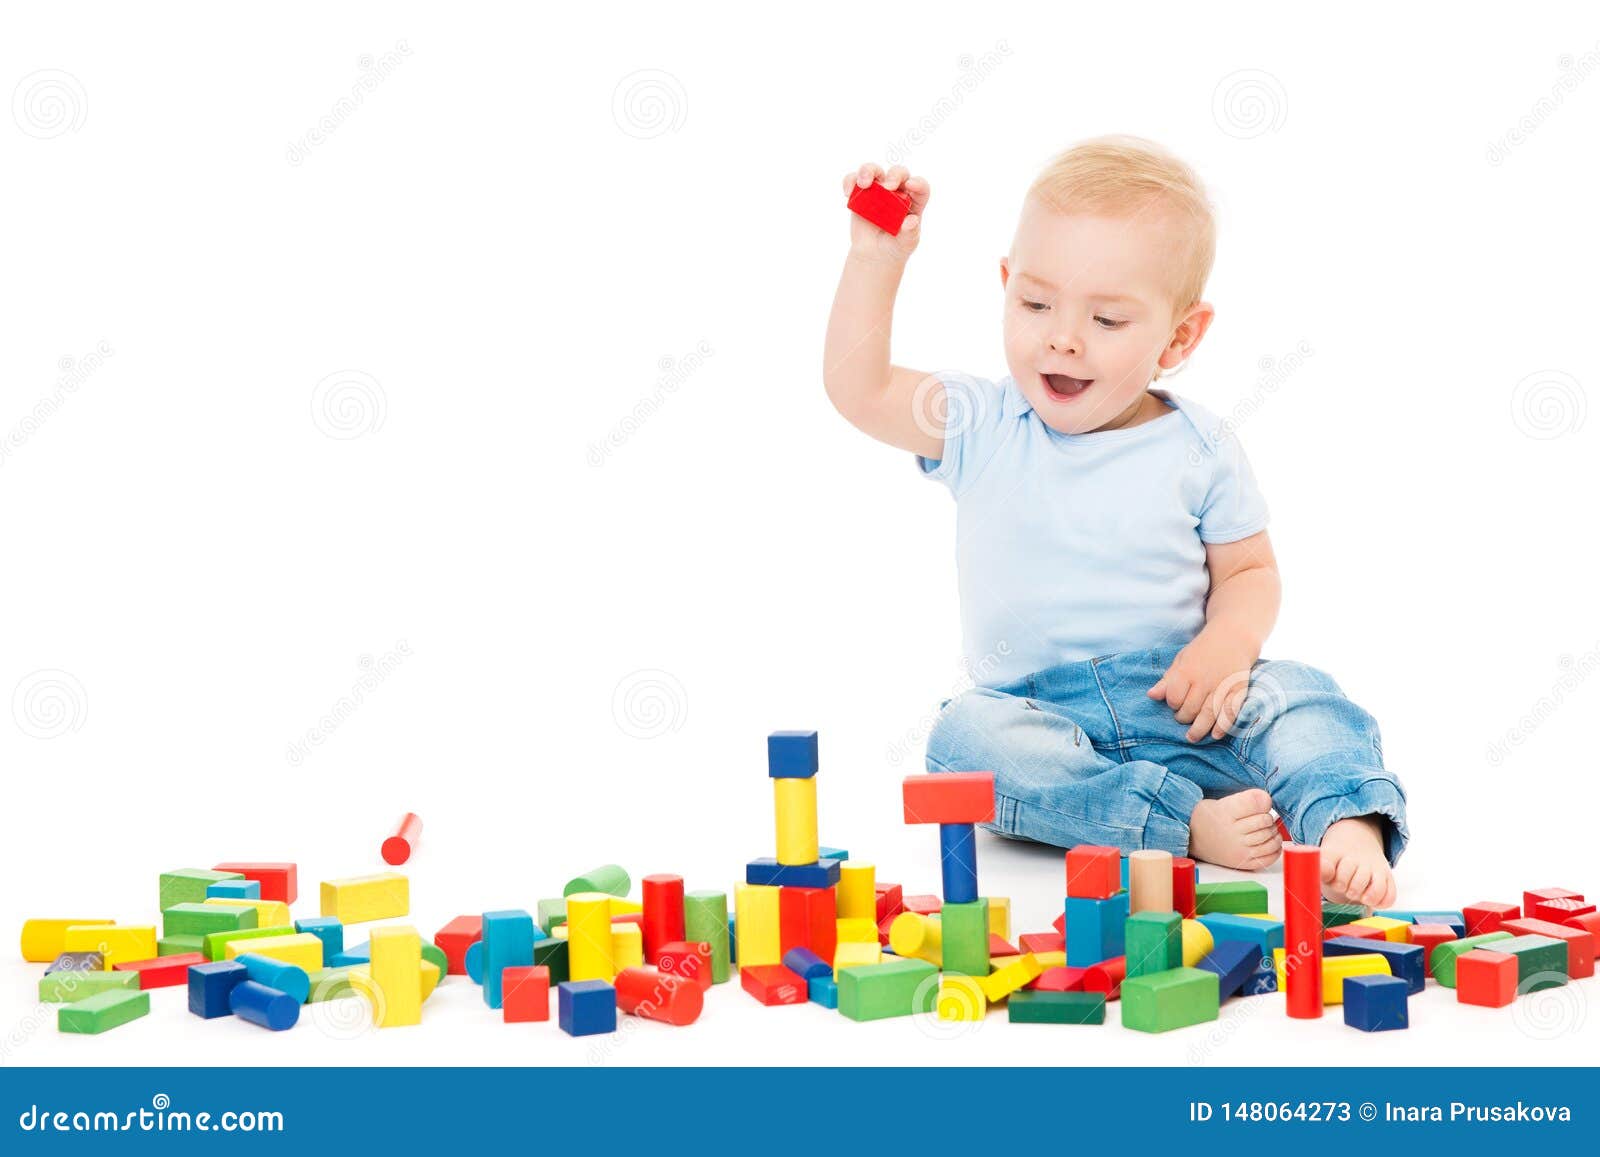 one year baby playing toys